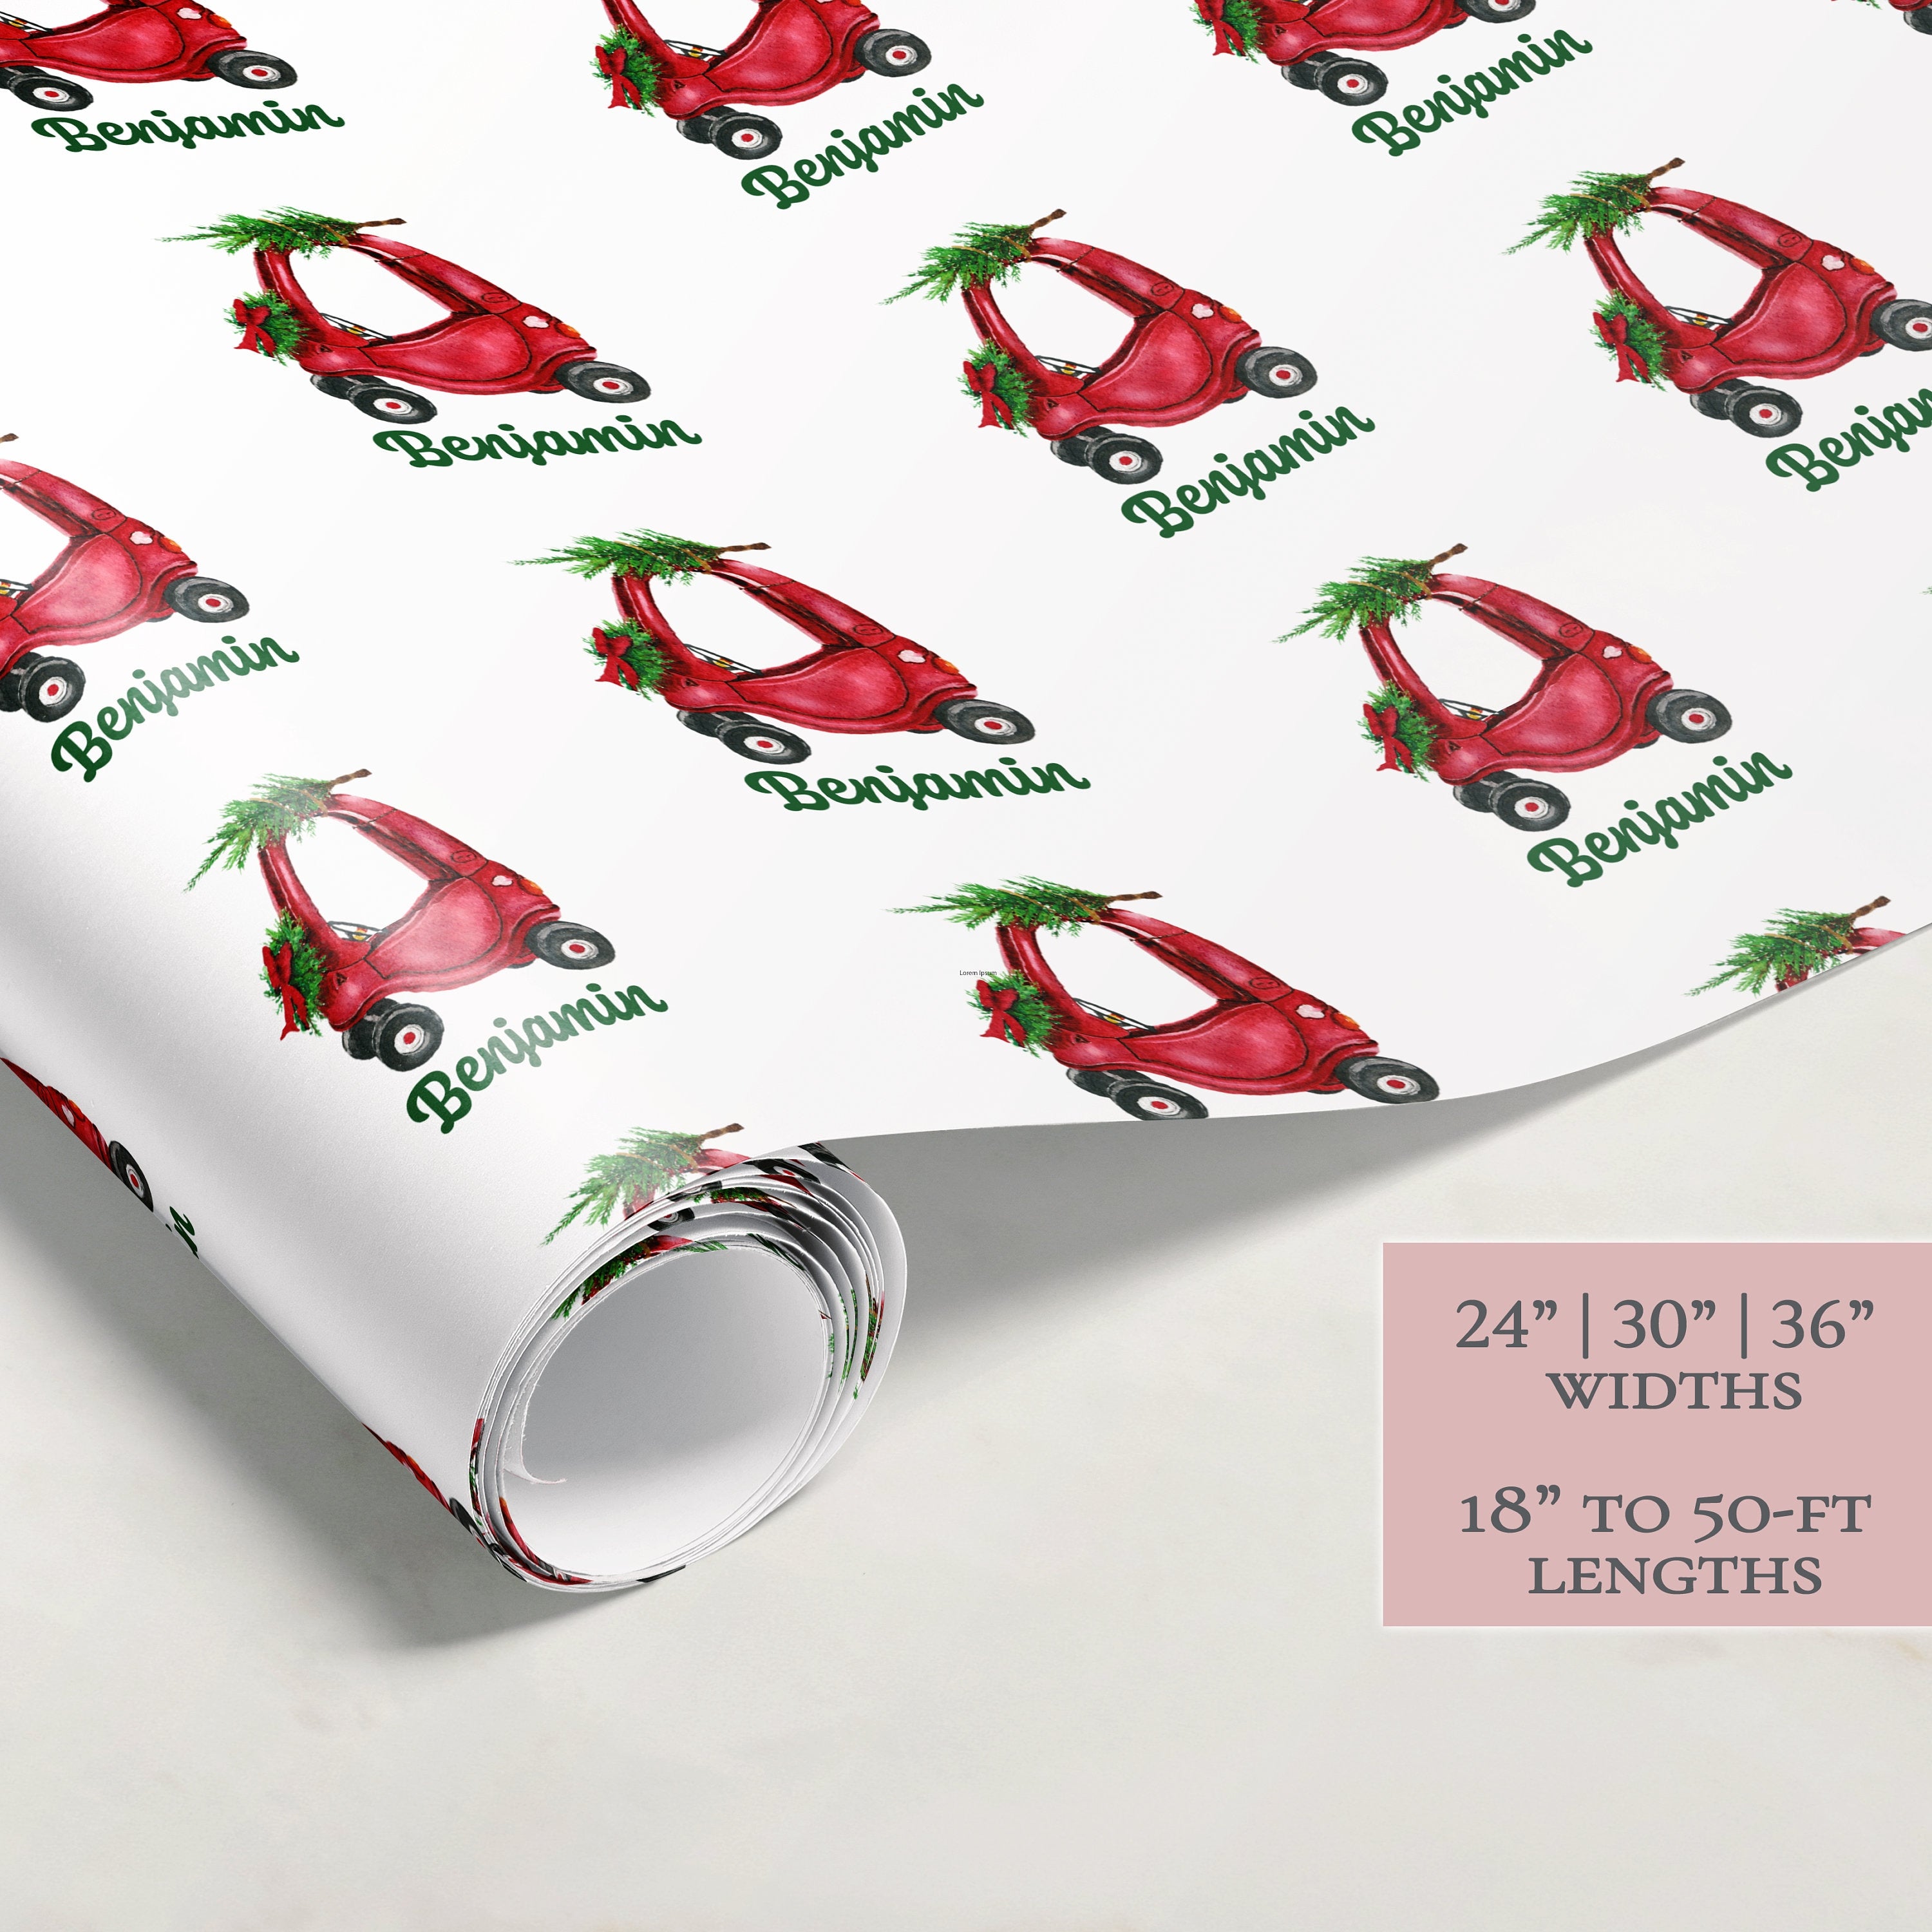 Kid Christmas Wrapping Paper | Personalized Wrapping Paper | Personalized Gifts | Custom Gift Wrap | Name Wrapping Paper | Holiday Gift Wrap